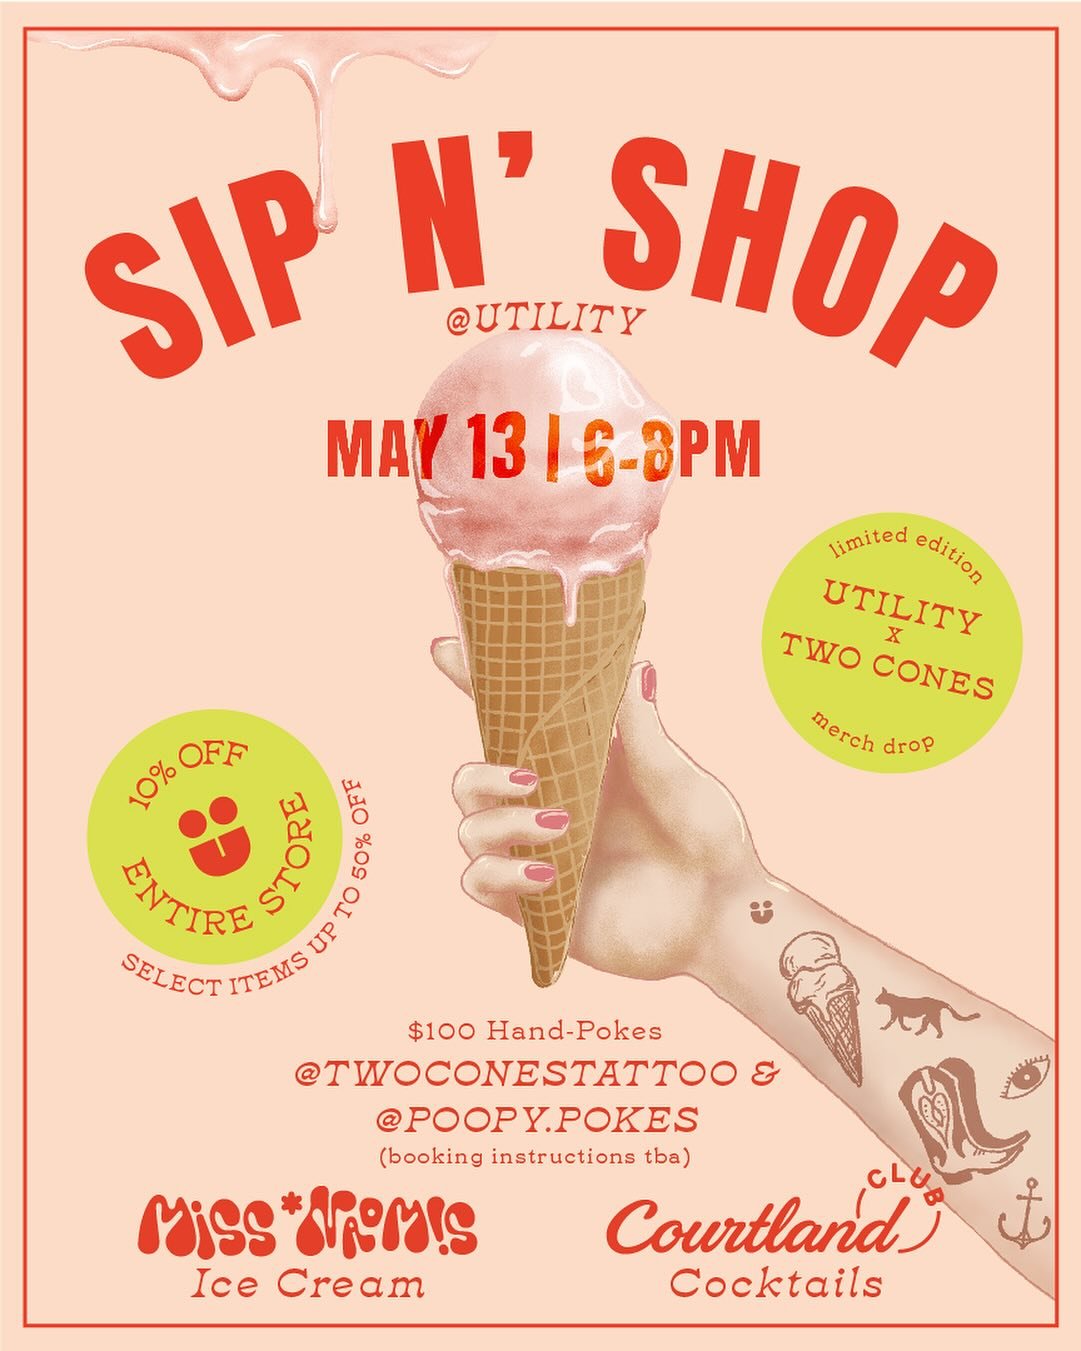 Alright folks listen up! 📣

We are THRILLED to announce our TENTH sip n&rsquo; shop&hellip; and it&rsquo;s happening MONDAY 5/13! Make sure to save the date because it&rsquo;s our last sip n&rsquo; shop until fall!!! 🗓️ 

We&rsquo;ve got @twoconest